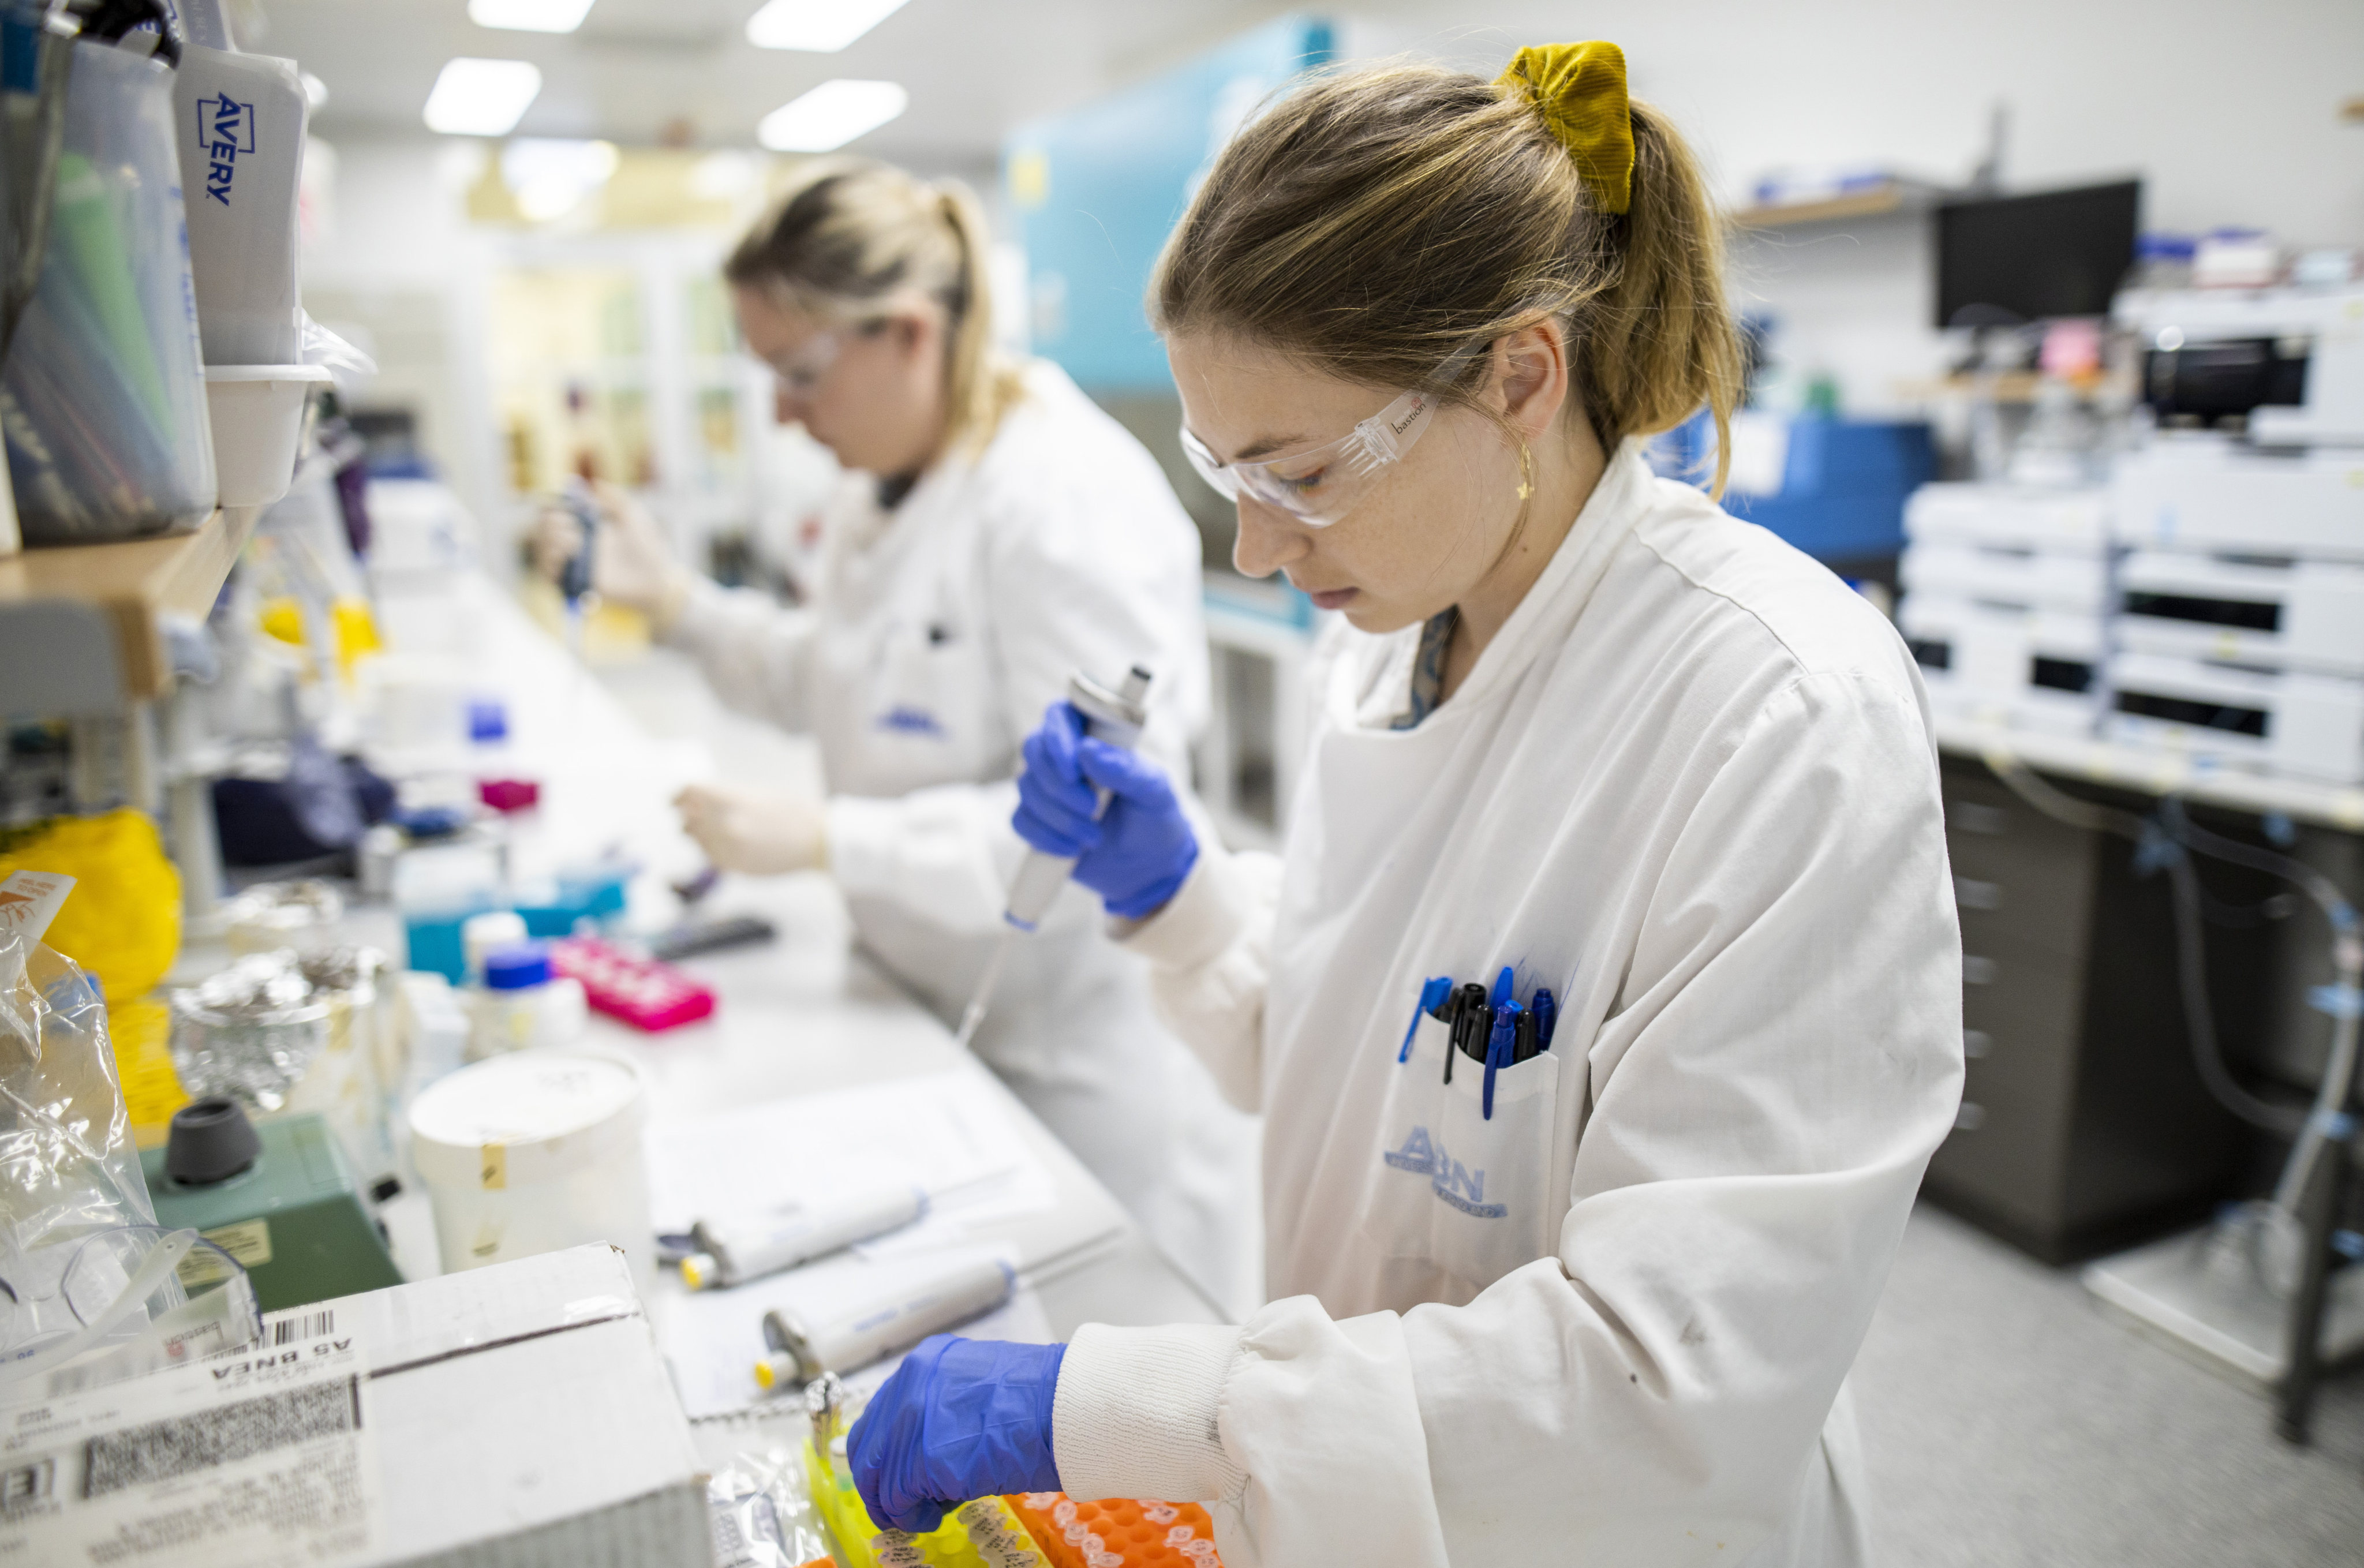 Researchers work in a lab at the University of Queensland, in Brisbane, Australia. Global challenges such as pandemics need global solutions. Photo: Handout